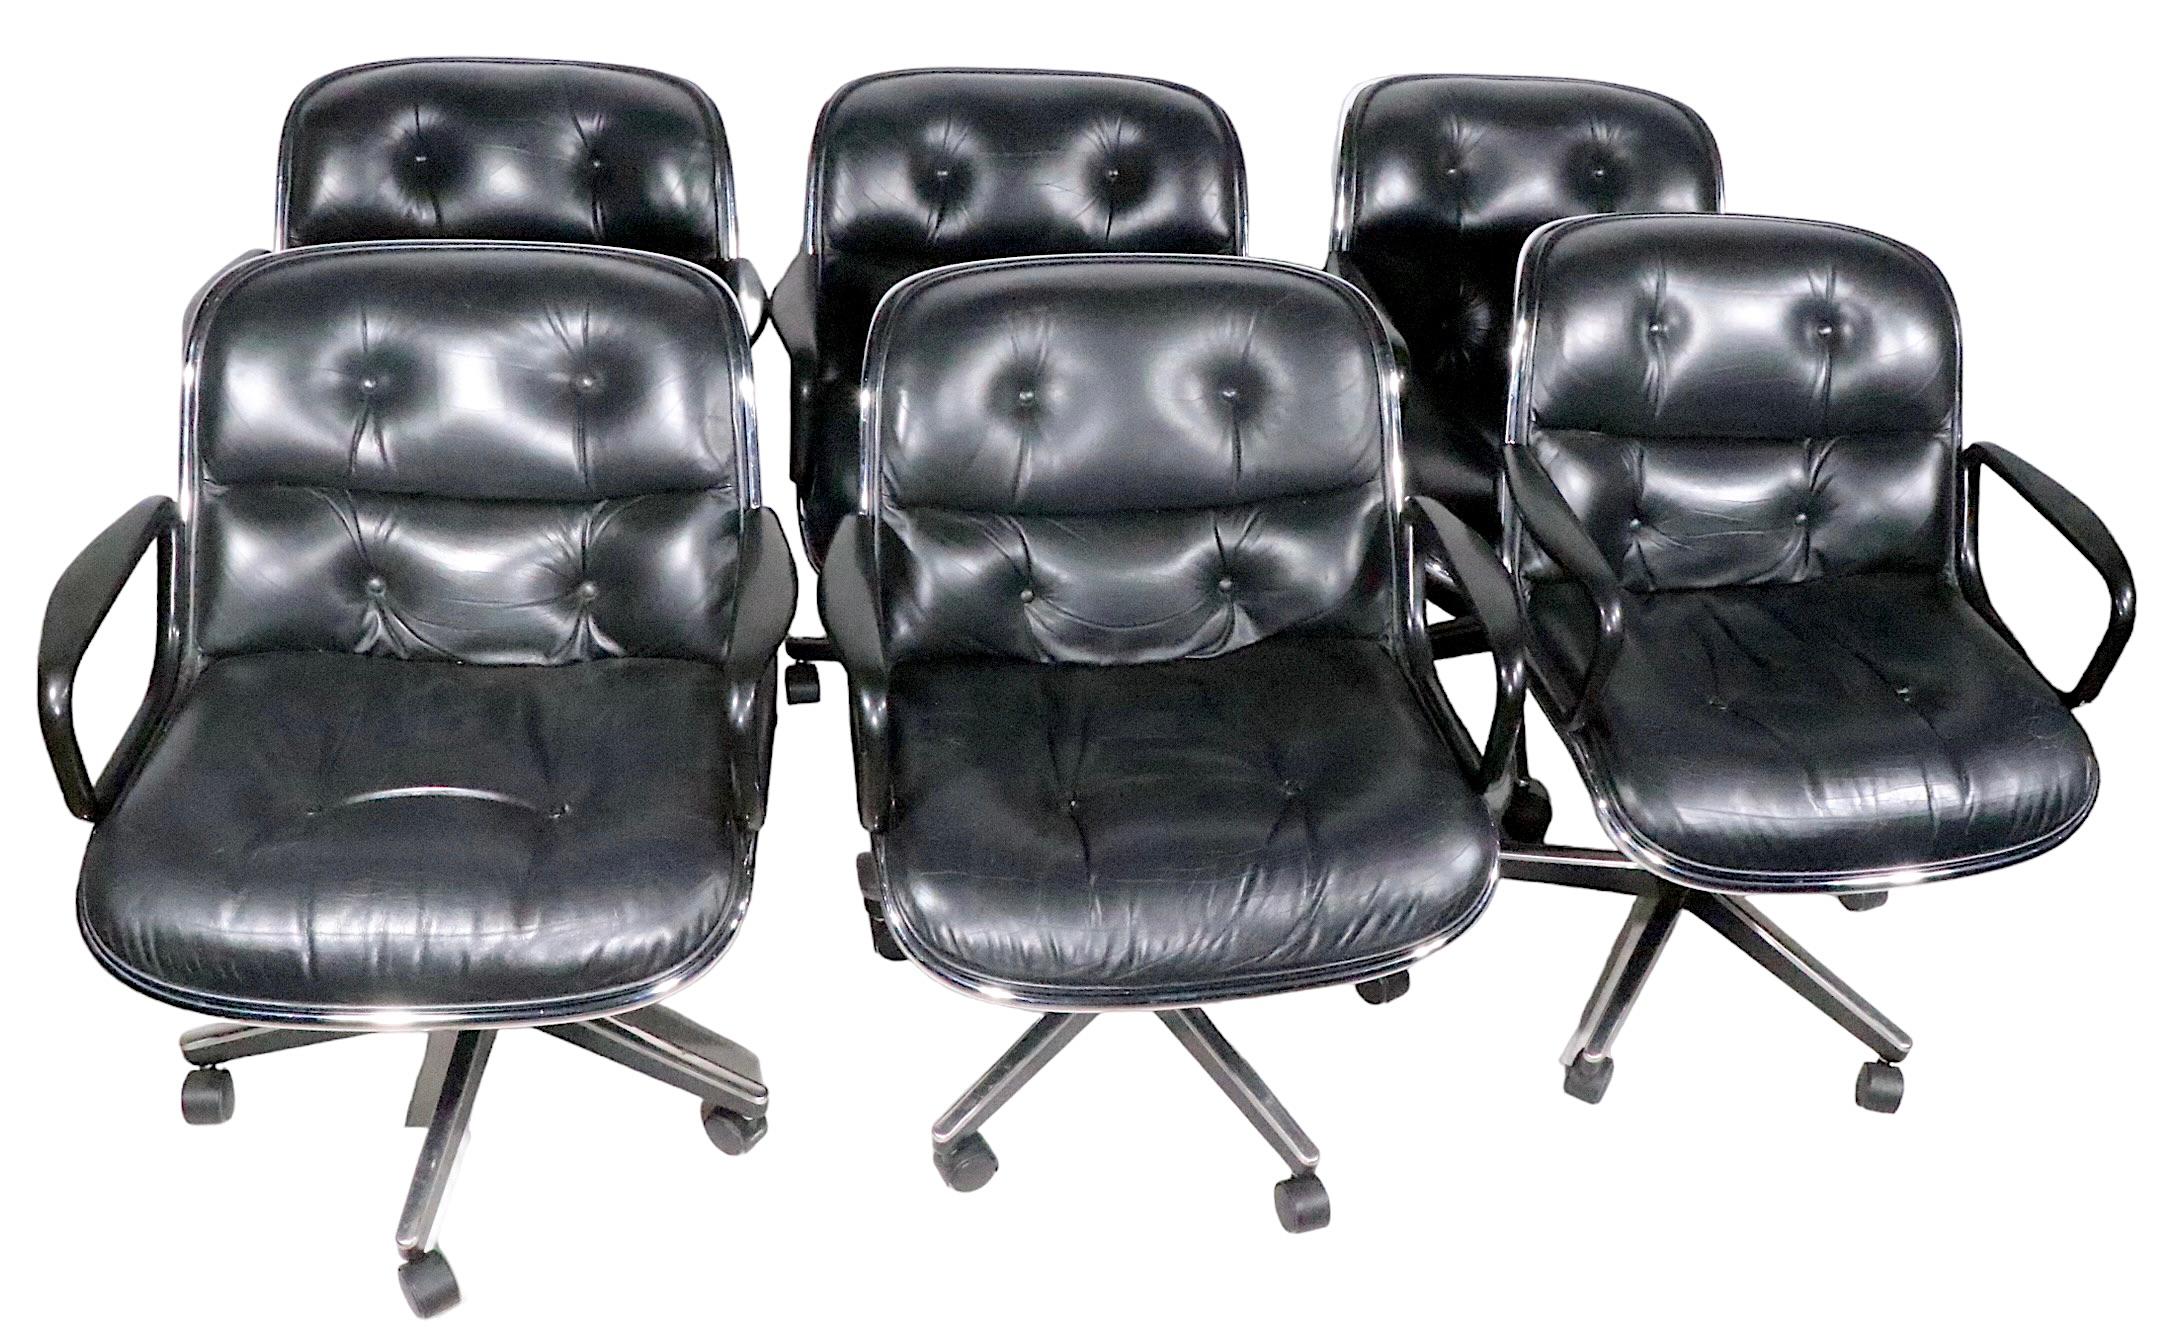 American 5 Knoll Swivel Tilt Office Chairs Designed by Charles Pollock for Knoll c 1960's For Sale